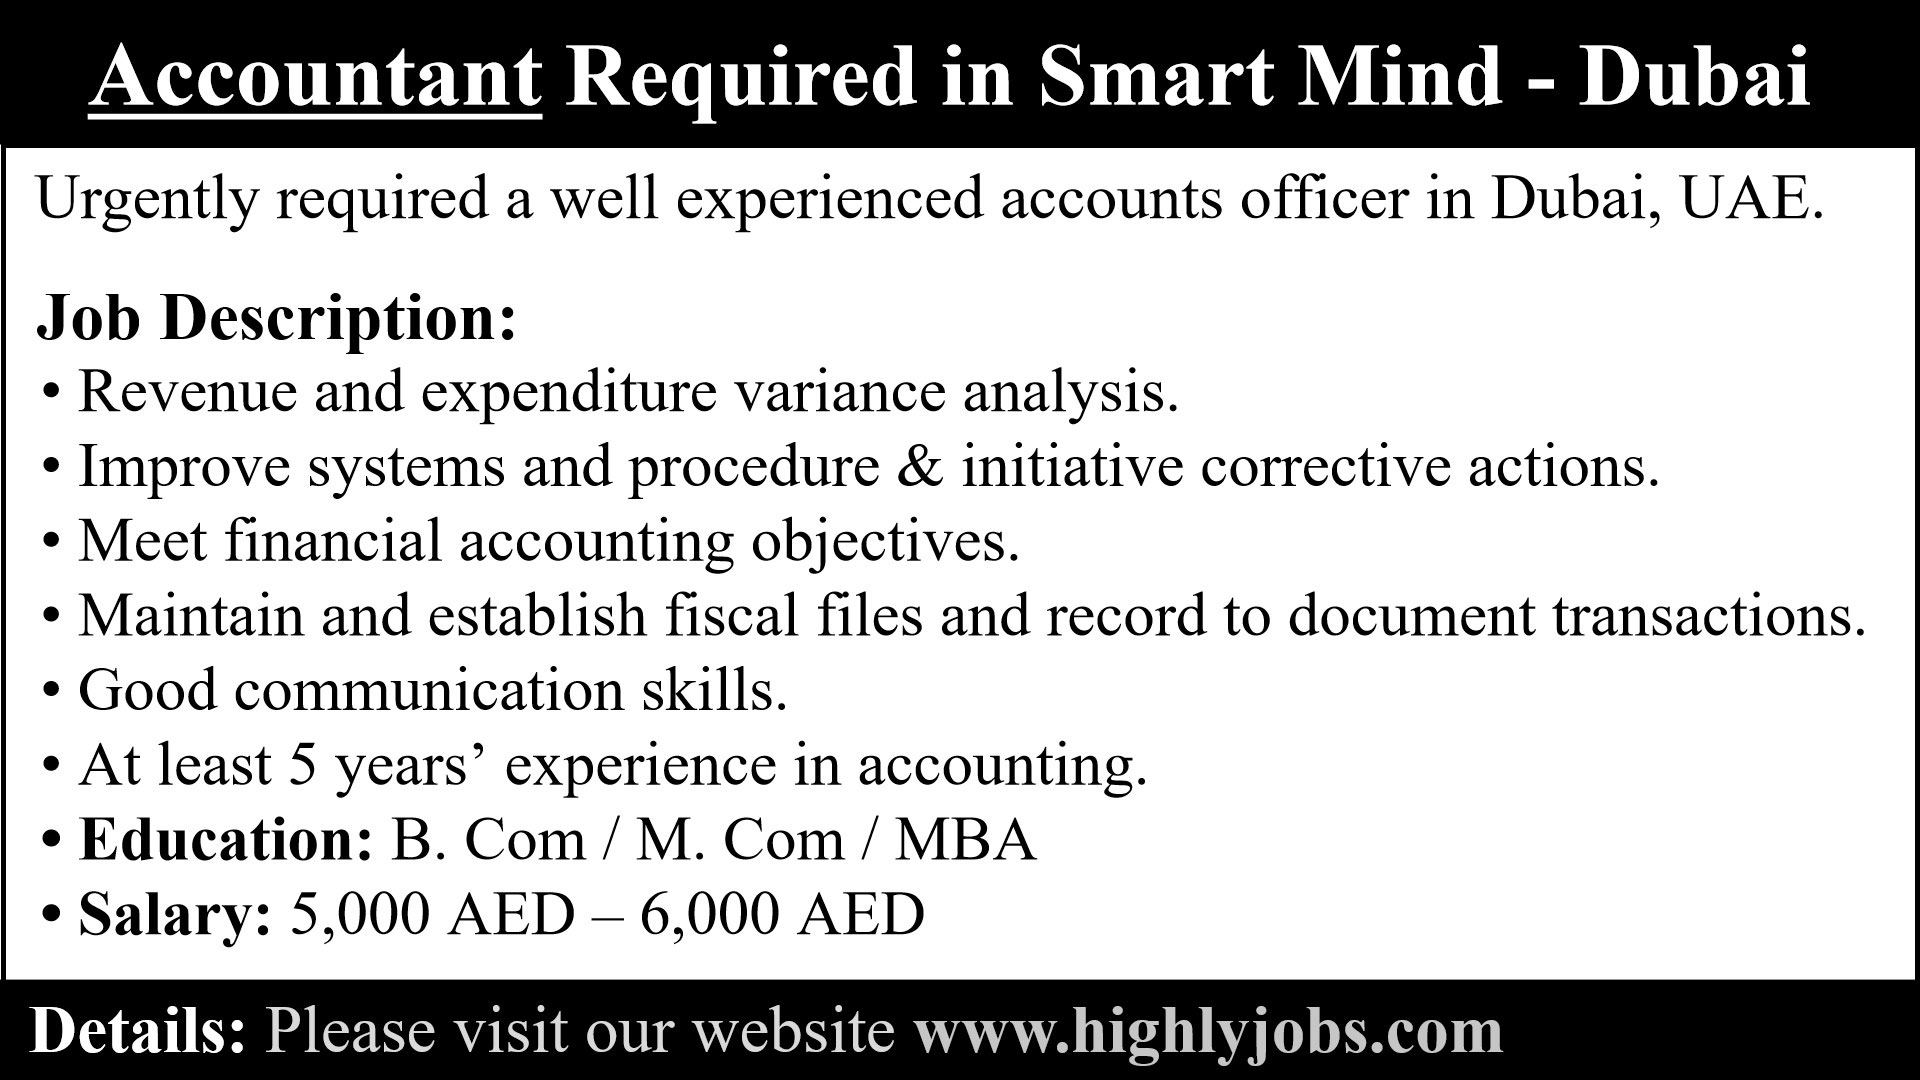 Accountant Required in Smart Mind - Dubai